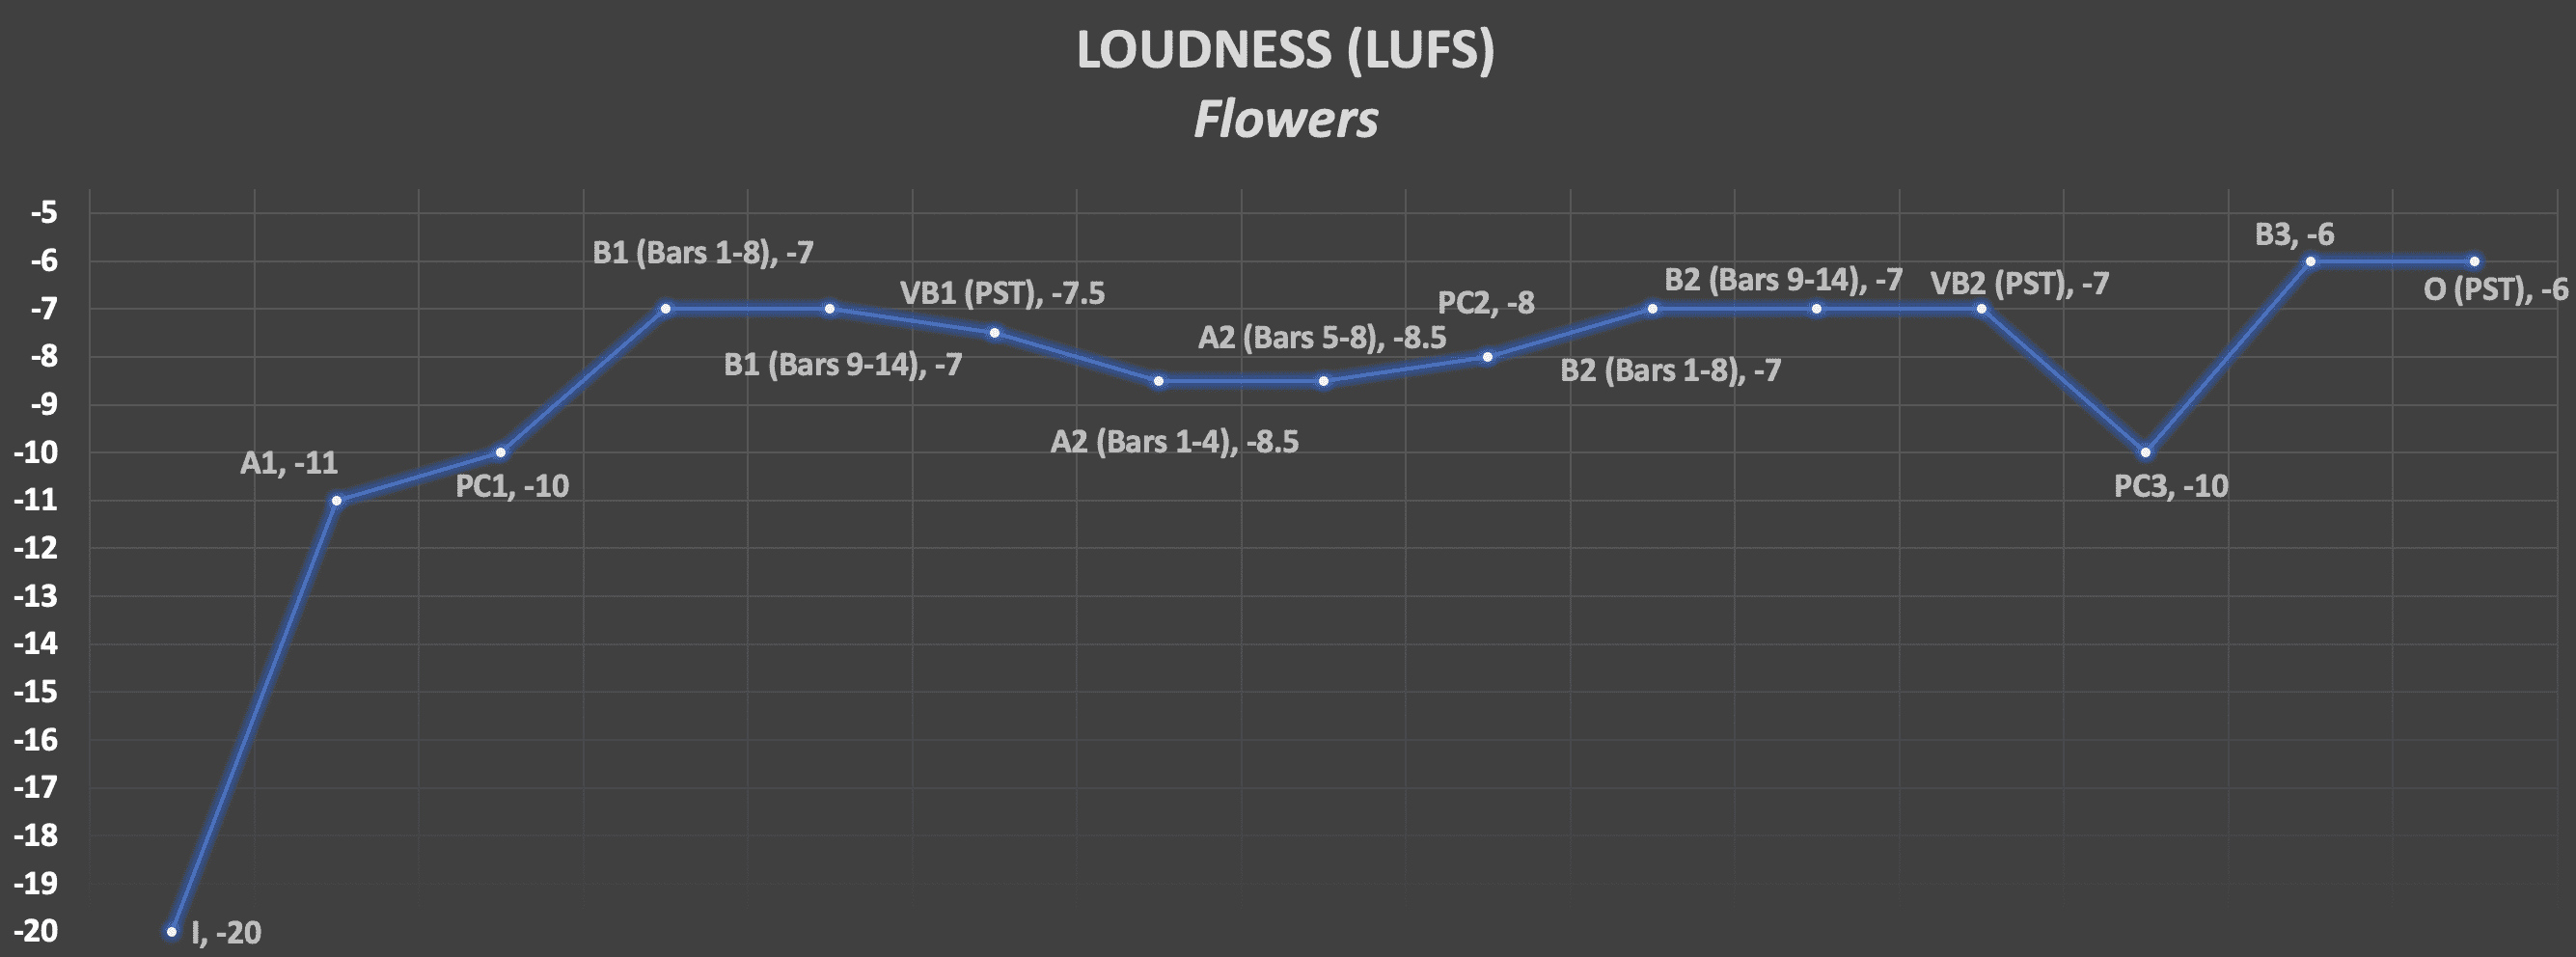 Flowers' Loudness Graph